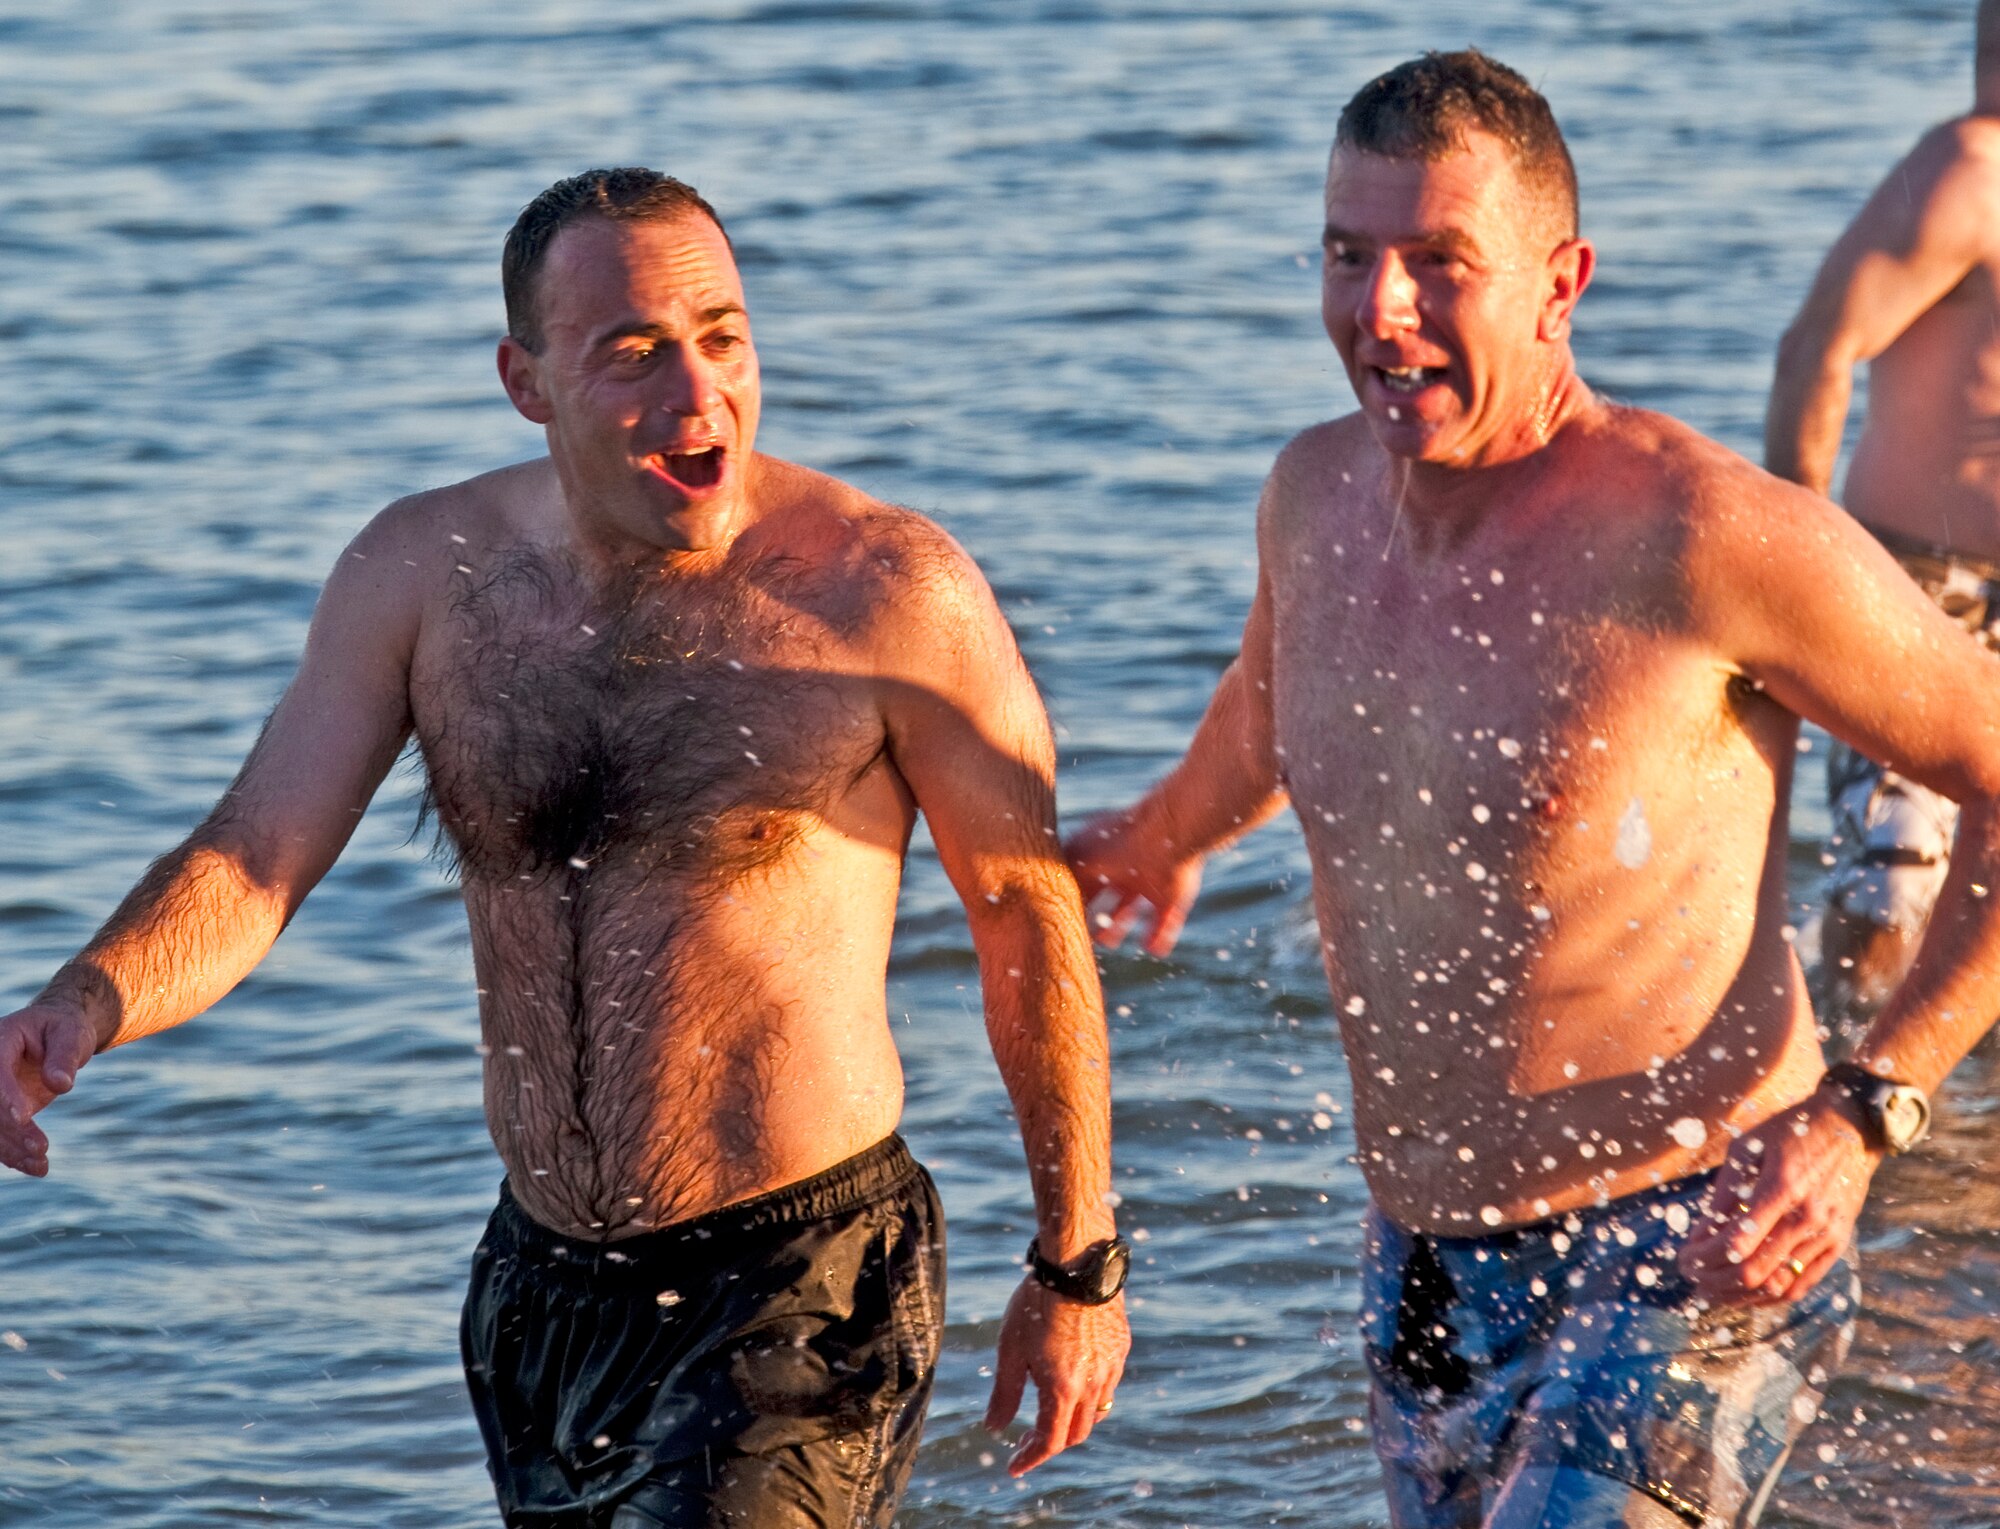 Col. Sal Nodjomian, 96th Air Base Wing commander and Chief Master Sgt. Tom Westermeyer, command chief, return to land after taking part in Eglin’s first-ever Polar Bear swim, held at Post’l Point, Jan. 7.  More than 100 braved the 34 degree temperatures and waded into Choctawhatchee Bay, including the Marine Fighter Attack Training Squadron 501 and members of the Coast Guard Station Destin.  (U.S. Air Force photo/Samuel King Jr.)